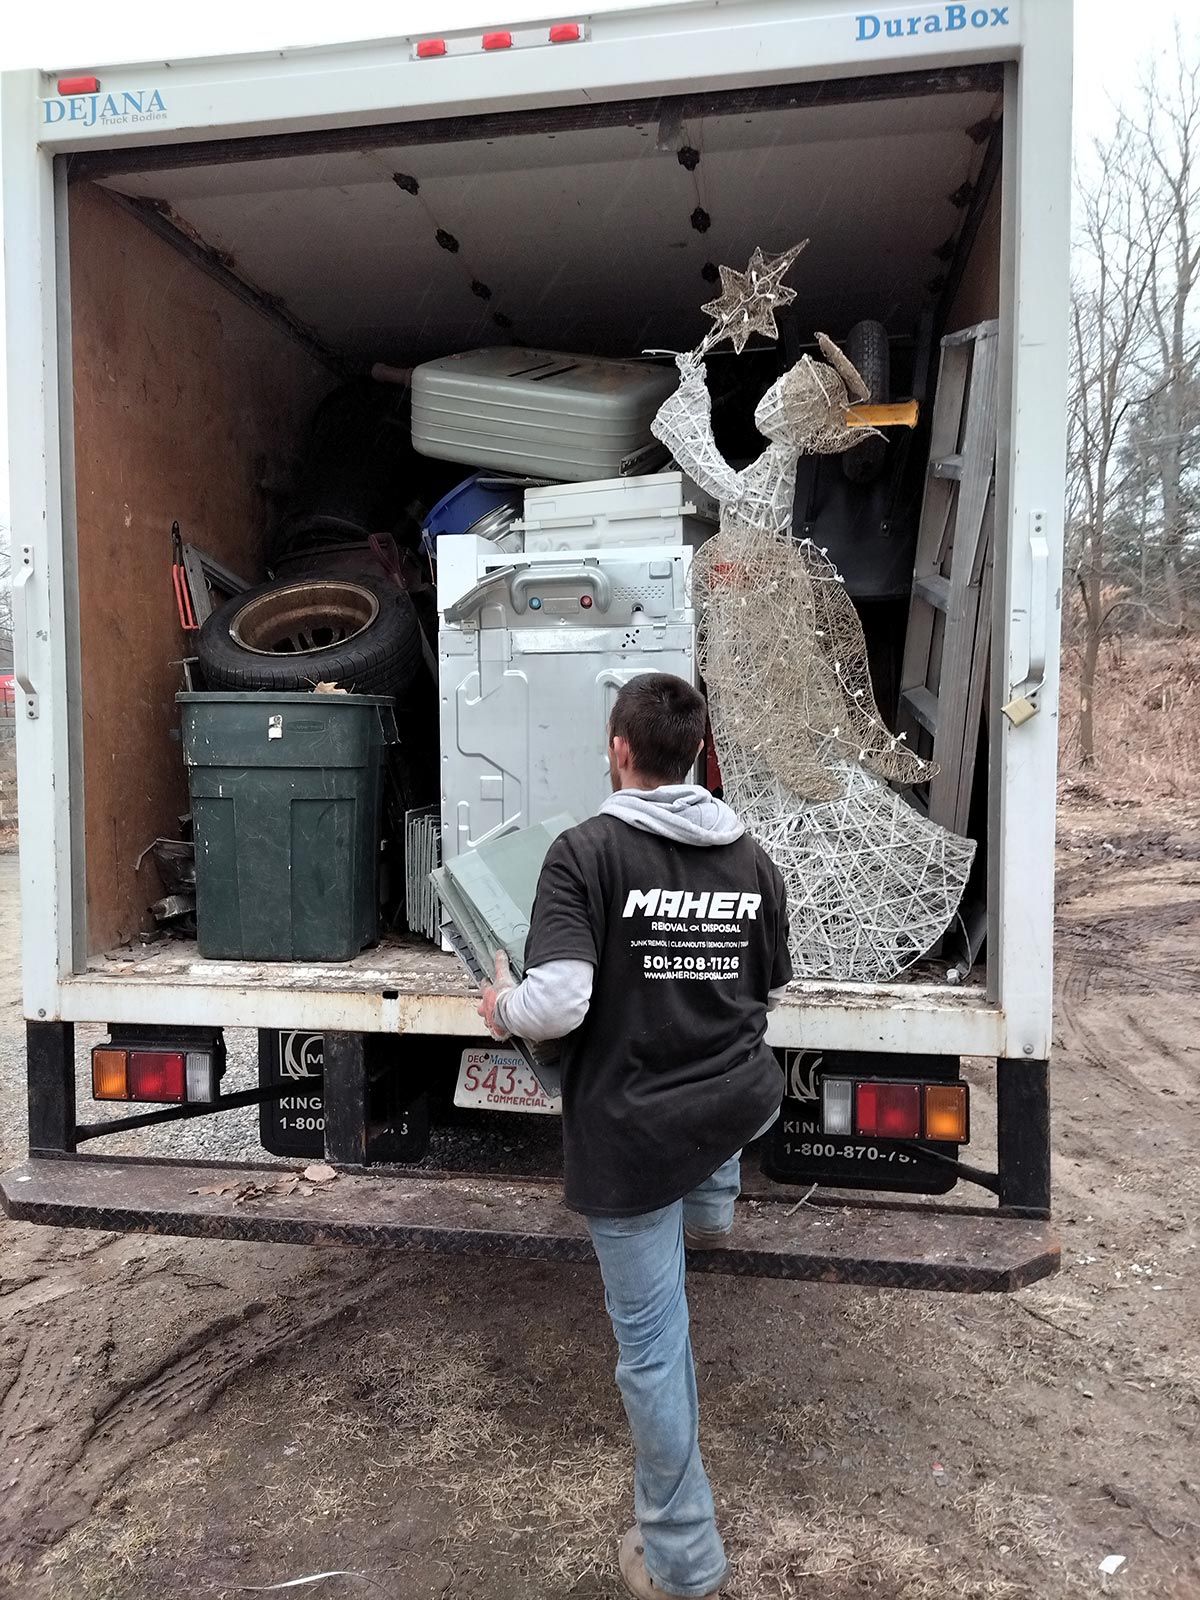 Maher Removal & Disposal has trucks for junk pickup and hauling by our team of professionals.